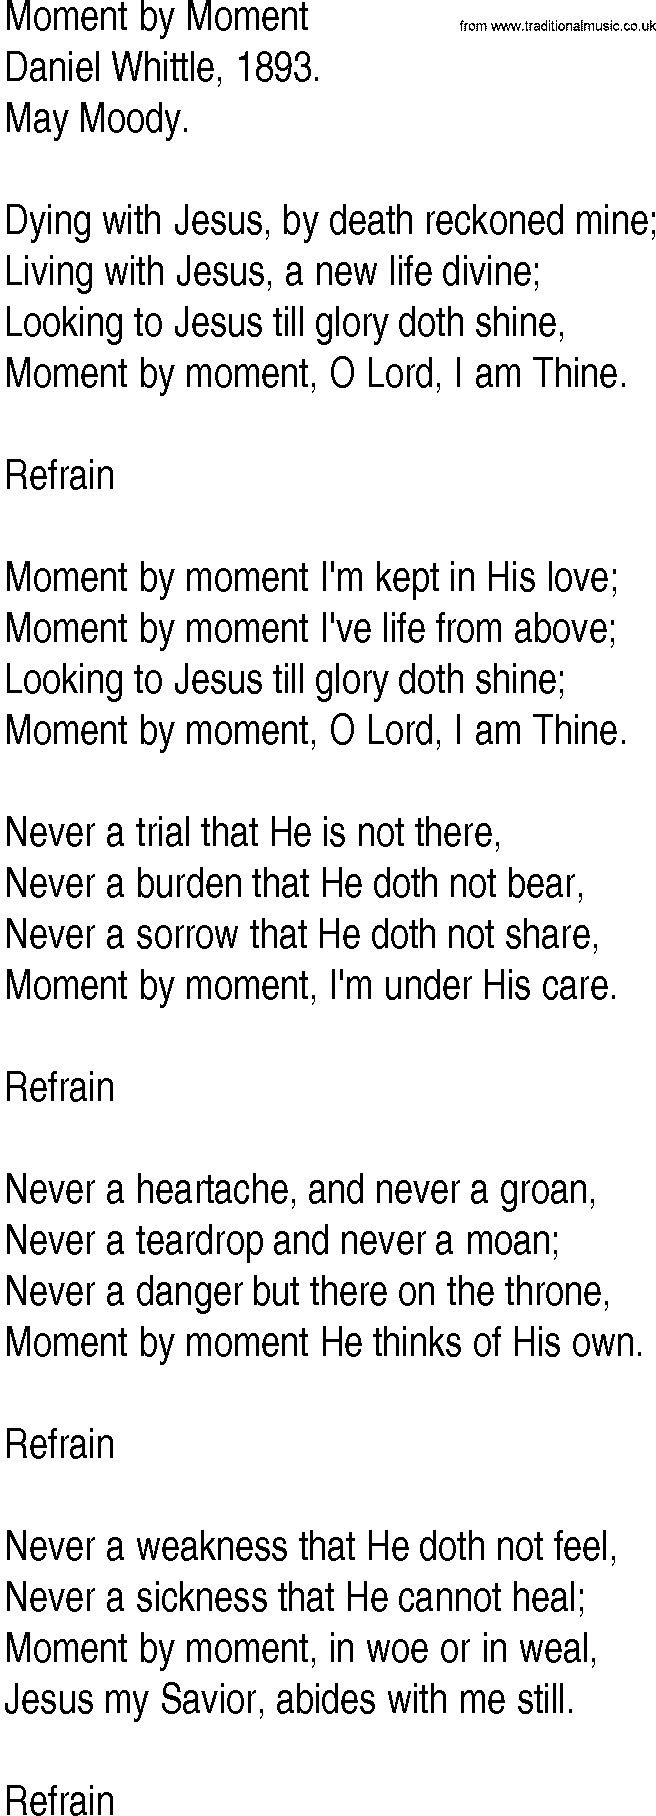 Hymn and Gospel Song: Moment by Moment by Daniel Whittle lyrics